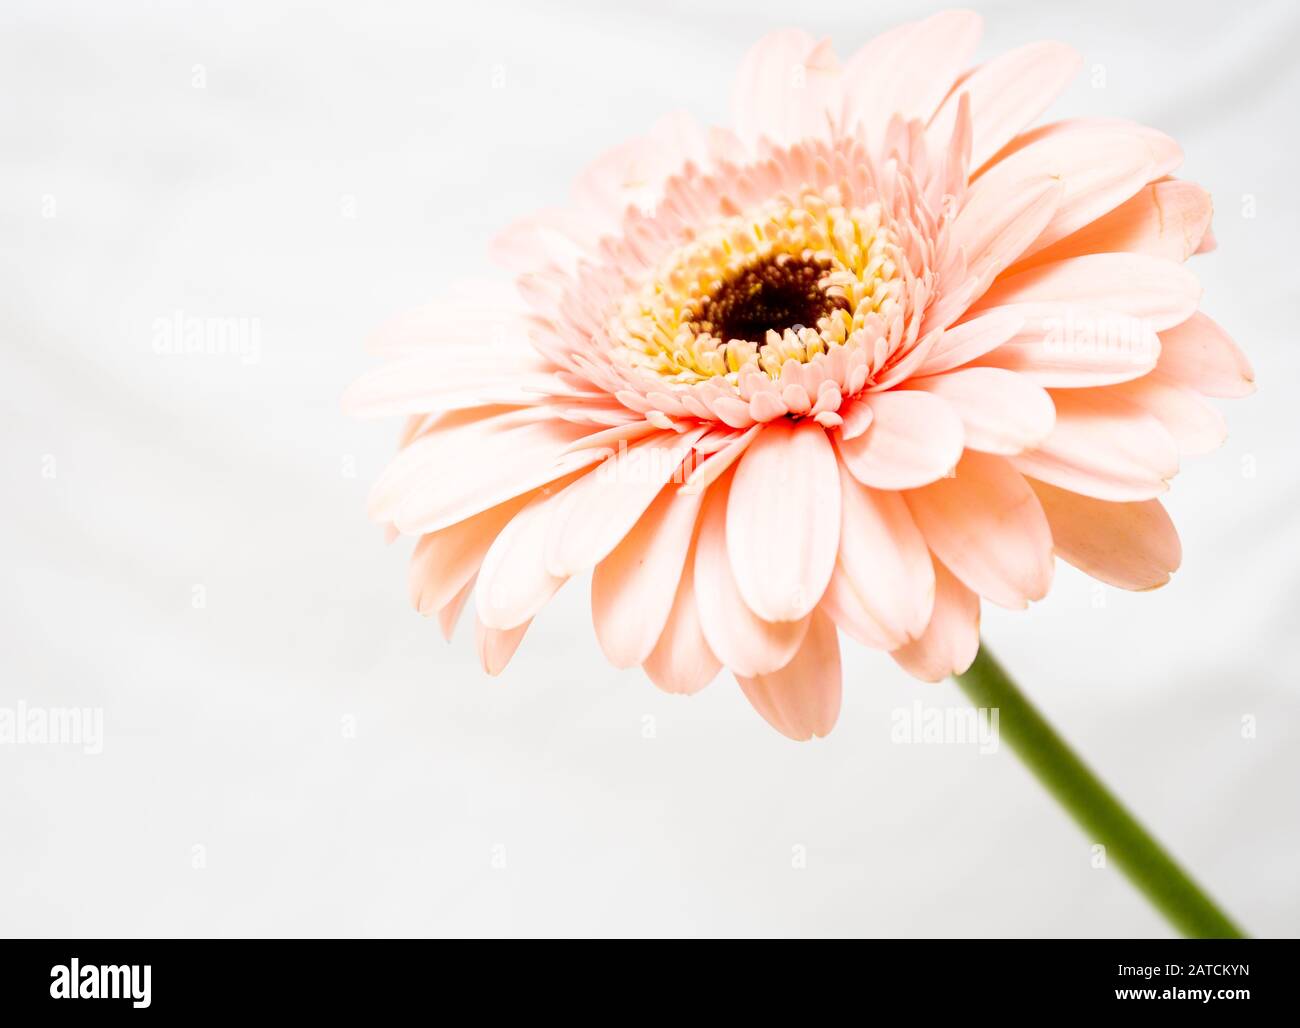 Macro Photo of a Vibrant Pink Gerbera Daisy Against a White Background Stock Photo